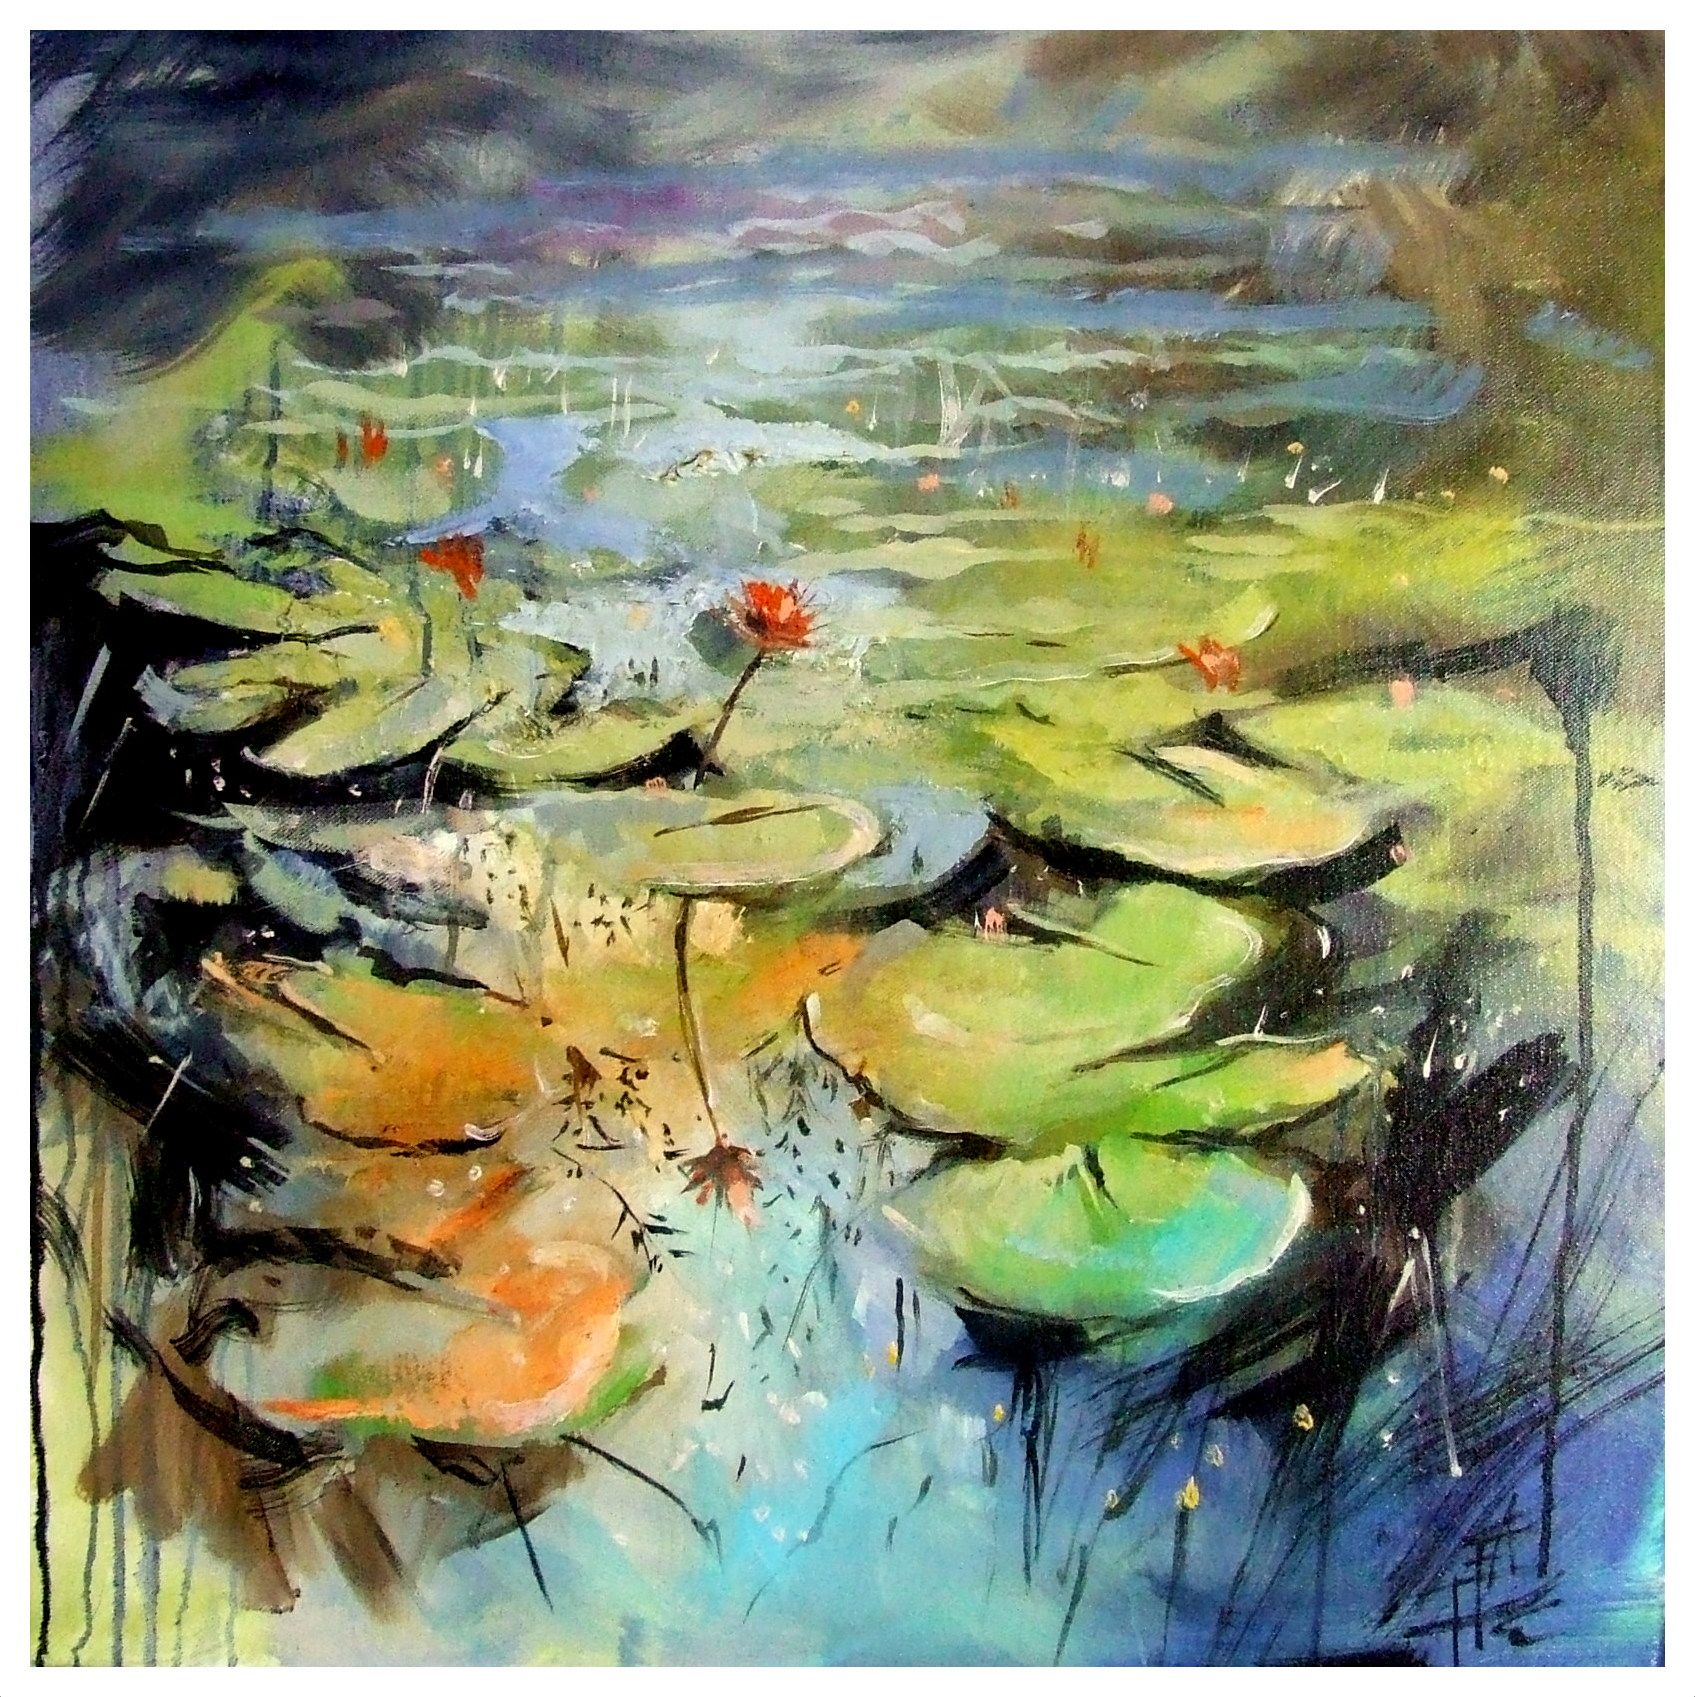 FLOWERING LILY PADS by Anne Farrall Doyle